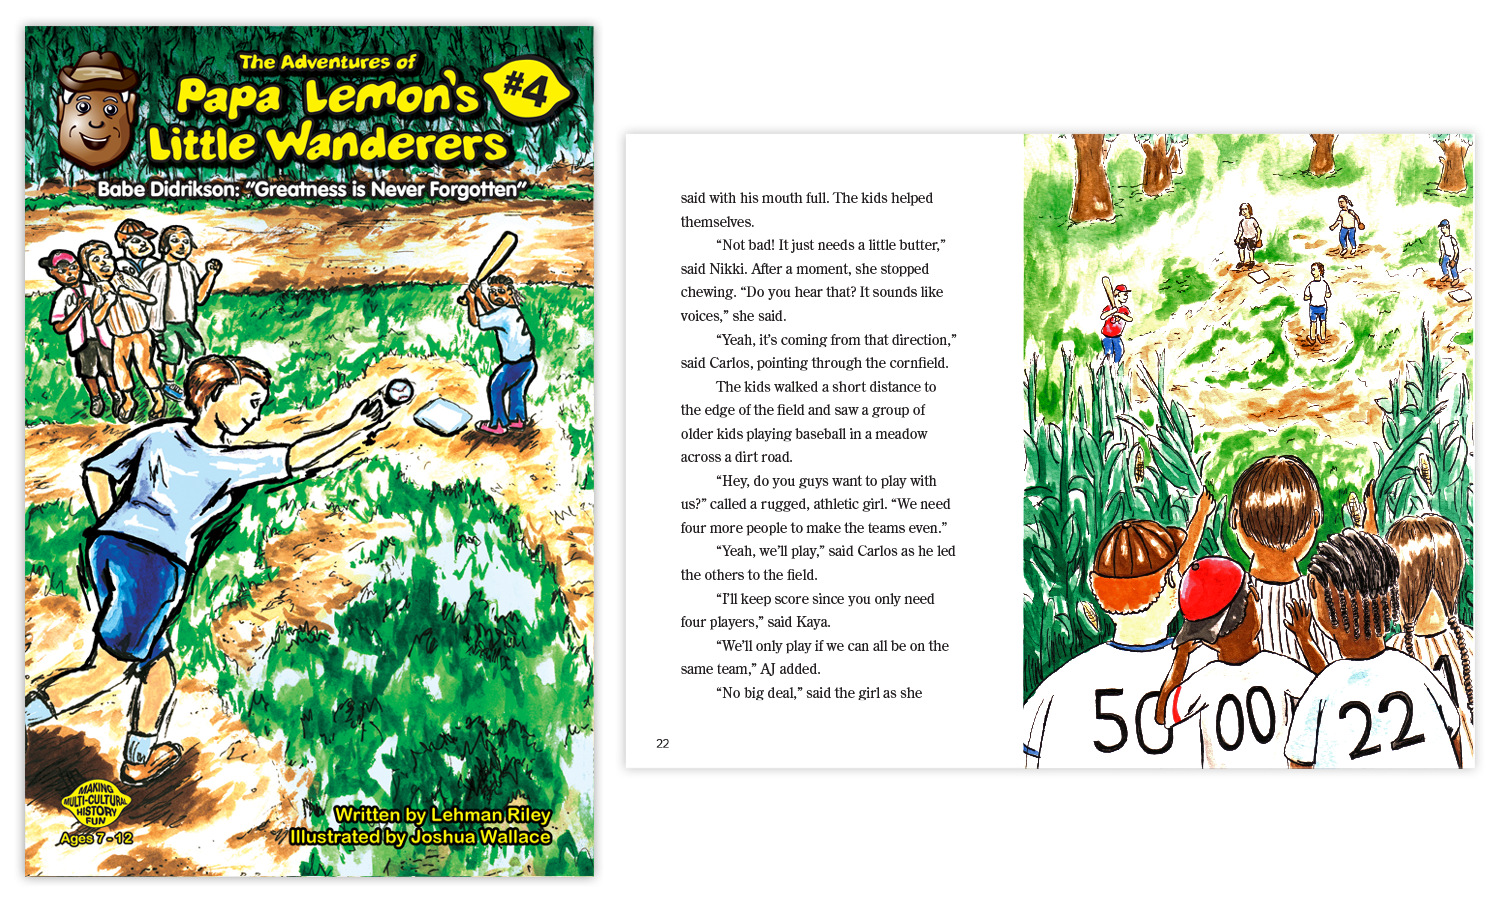 Twin Cities Childrens Book Illustrator Josh Wallace "The Adventures of Papa Lemon's Little Wanderers, Book 4: Babe Didrikson: 'Greatness is Never Forgotten'"